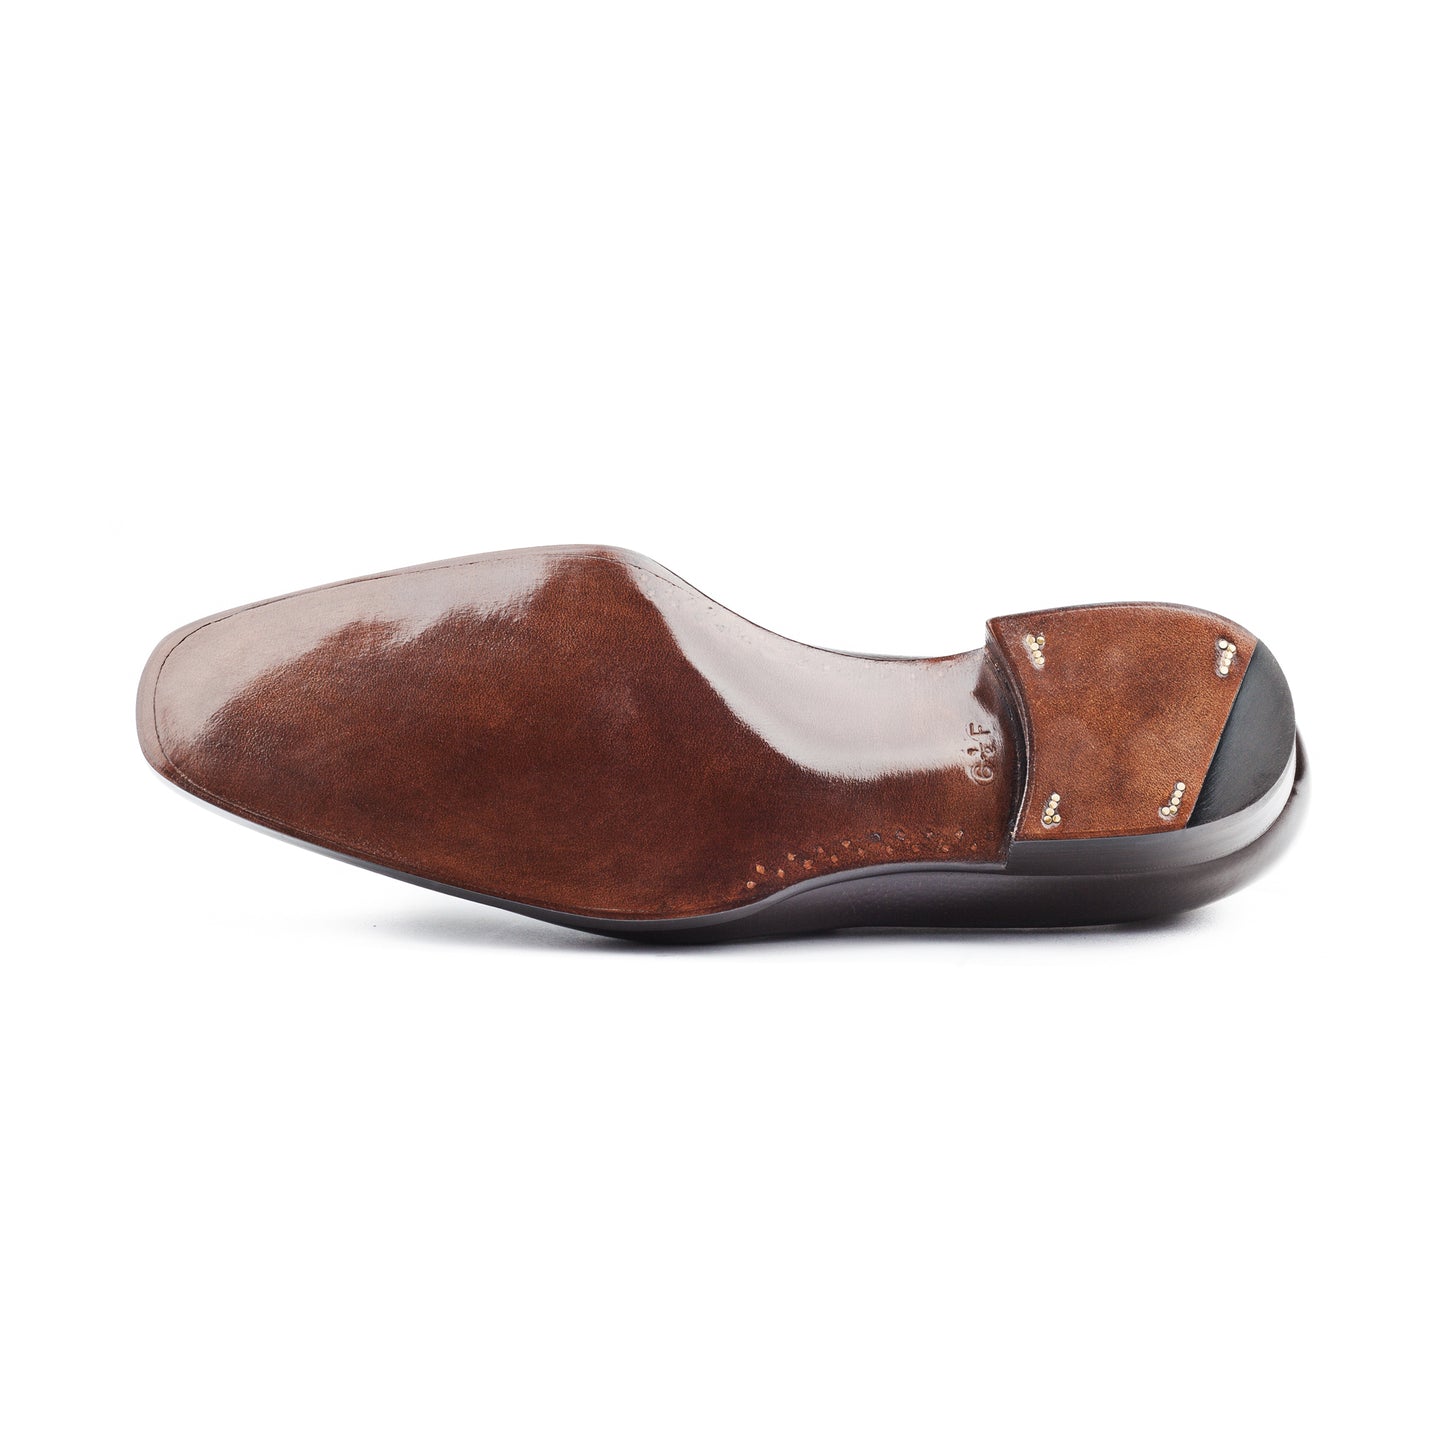 Norwegian Loafer with hand-stitched apron in dark brown Inca calf